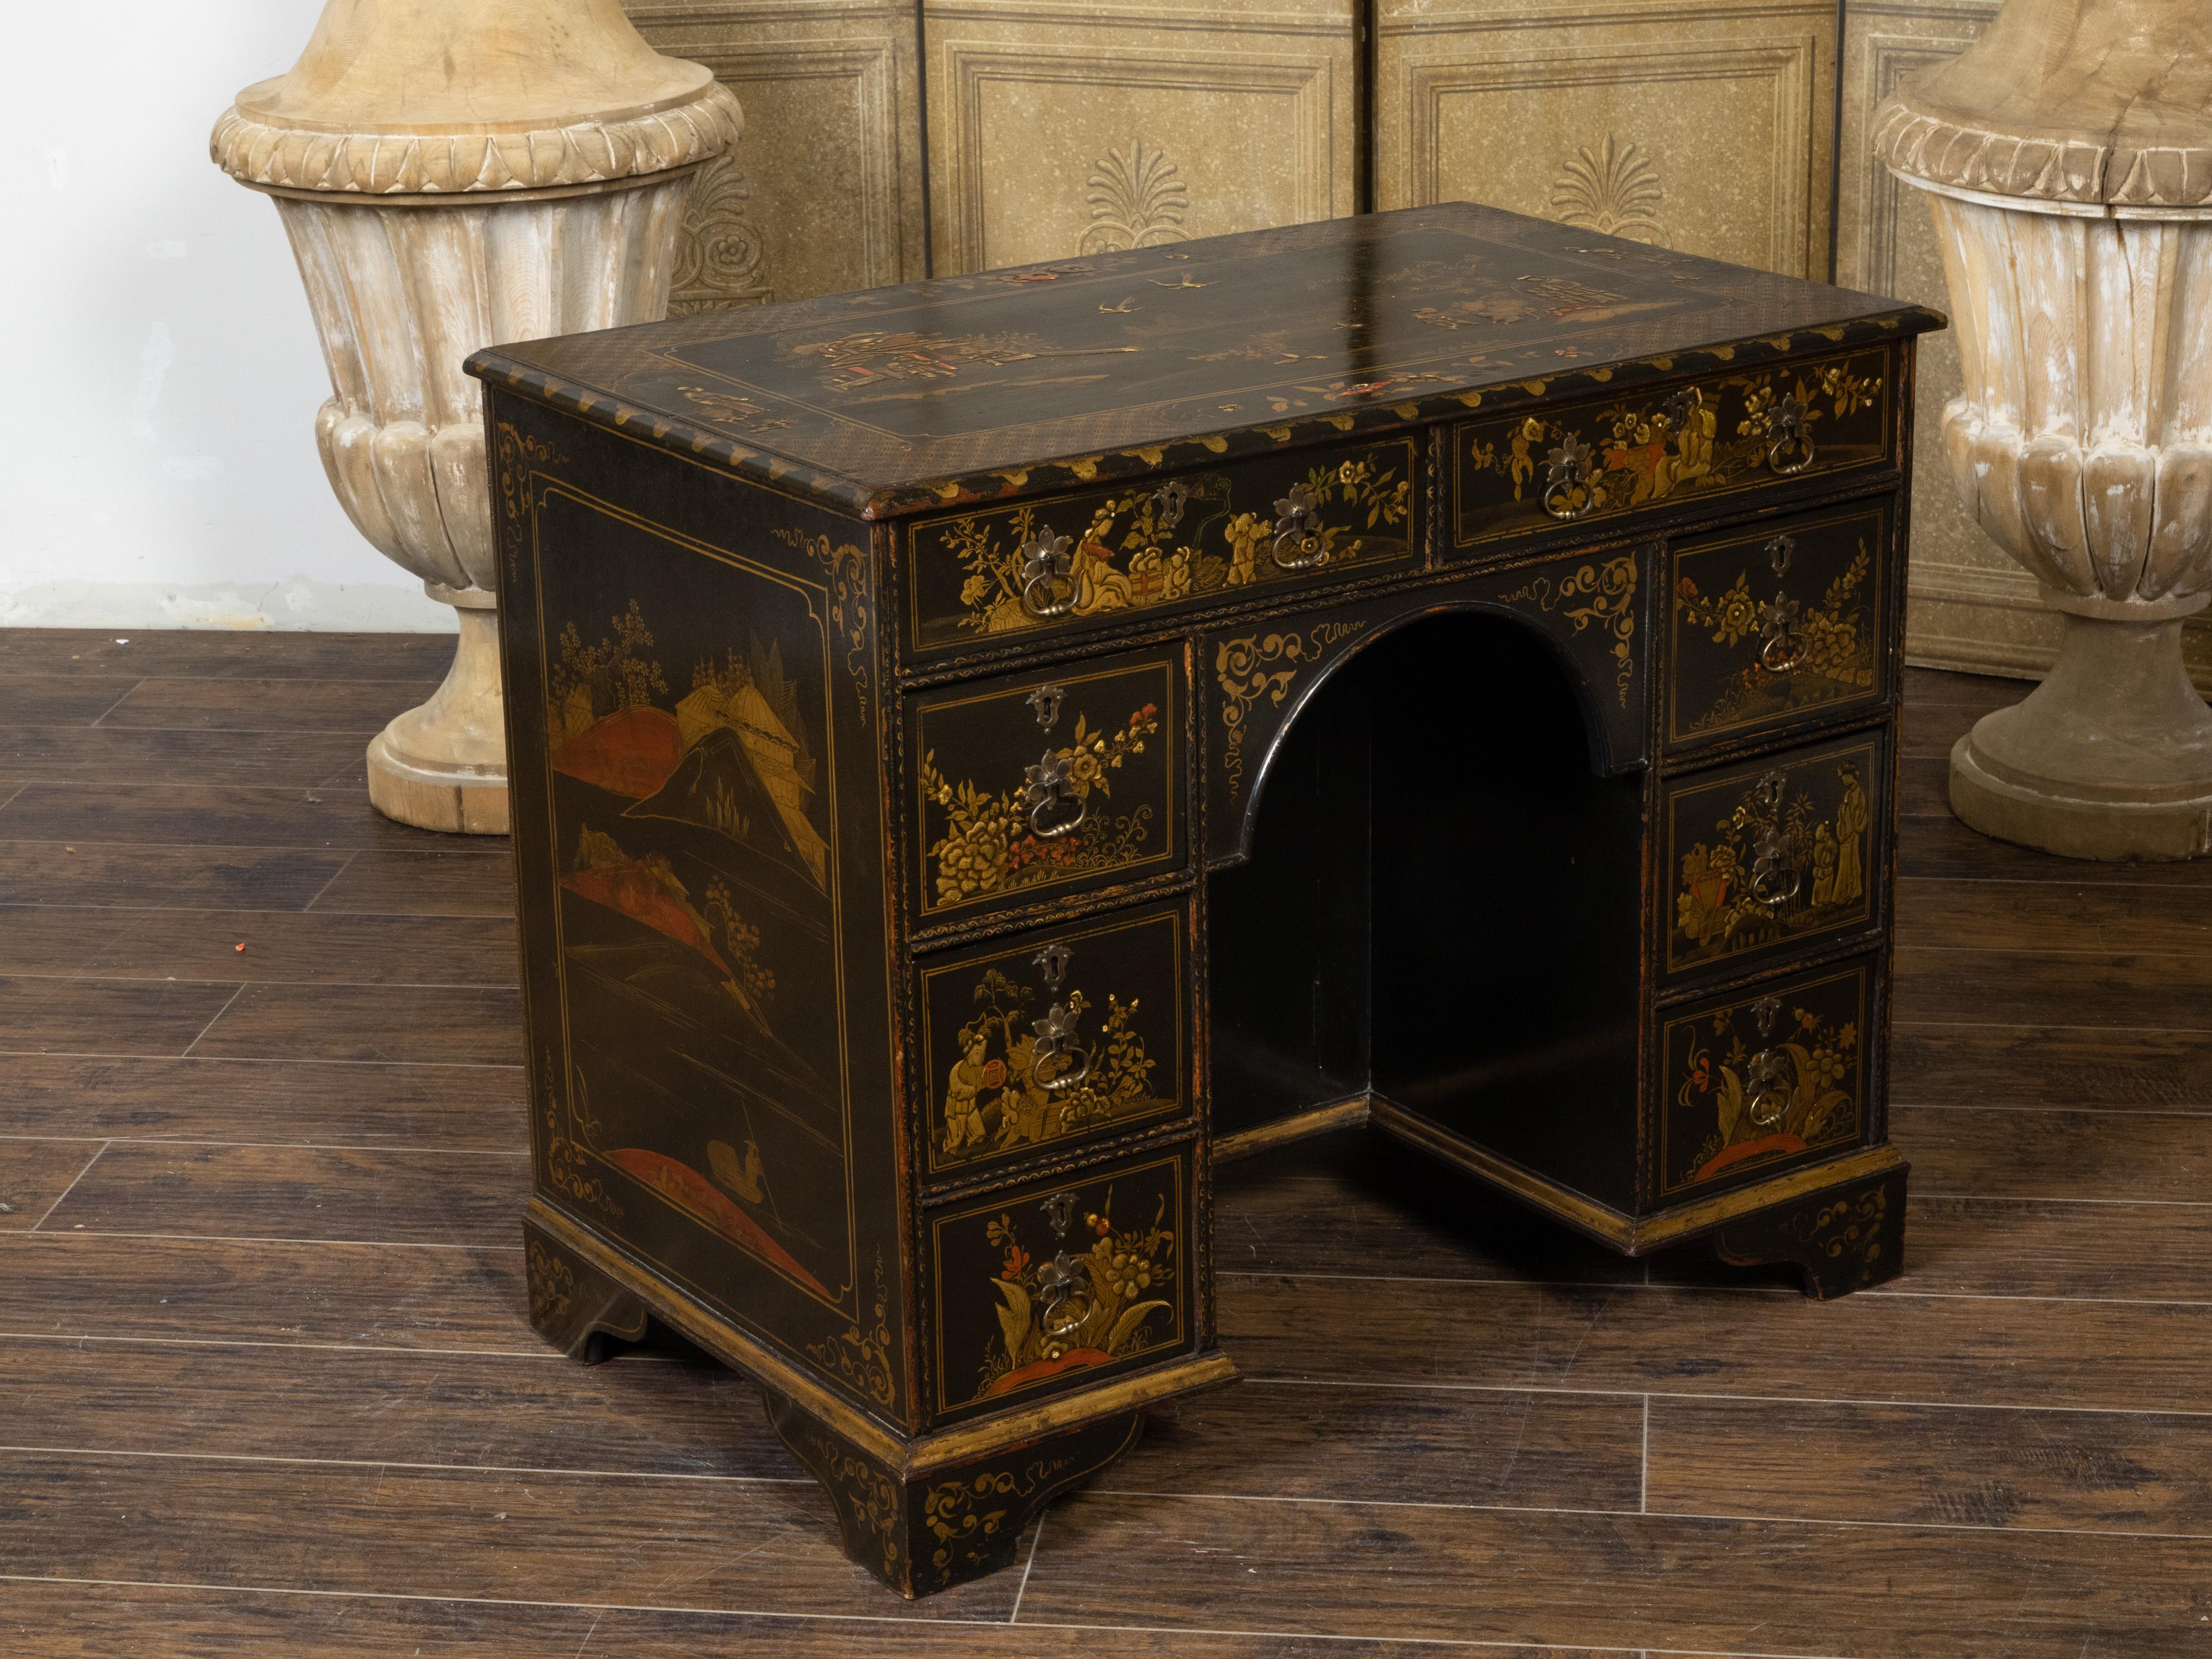 English 19th Century Japanned Desk with Black and Gold Chinoiserie Décor For Sale 3